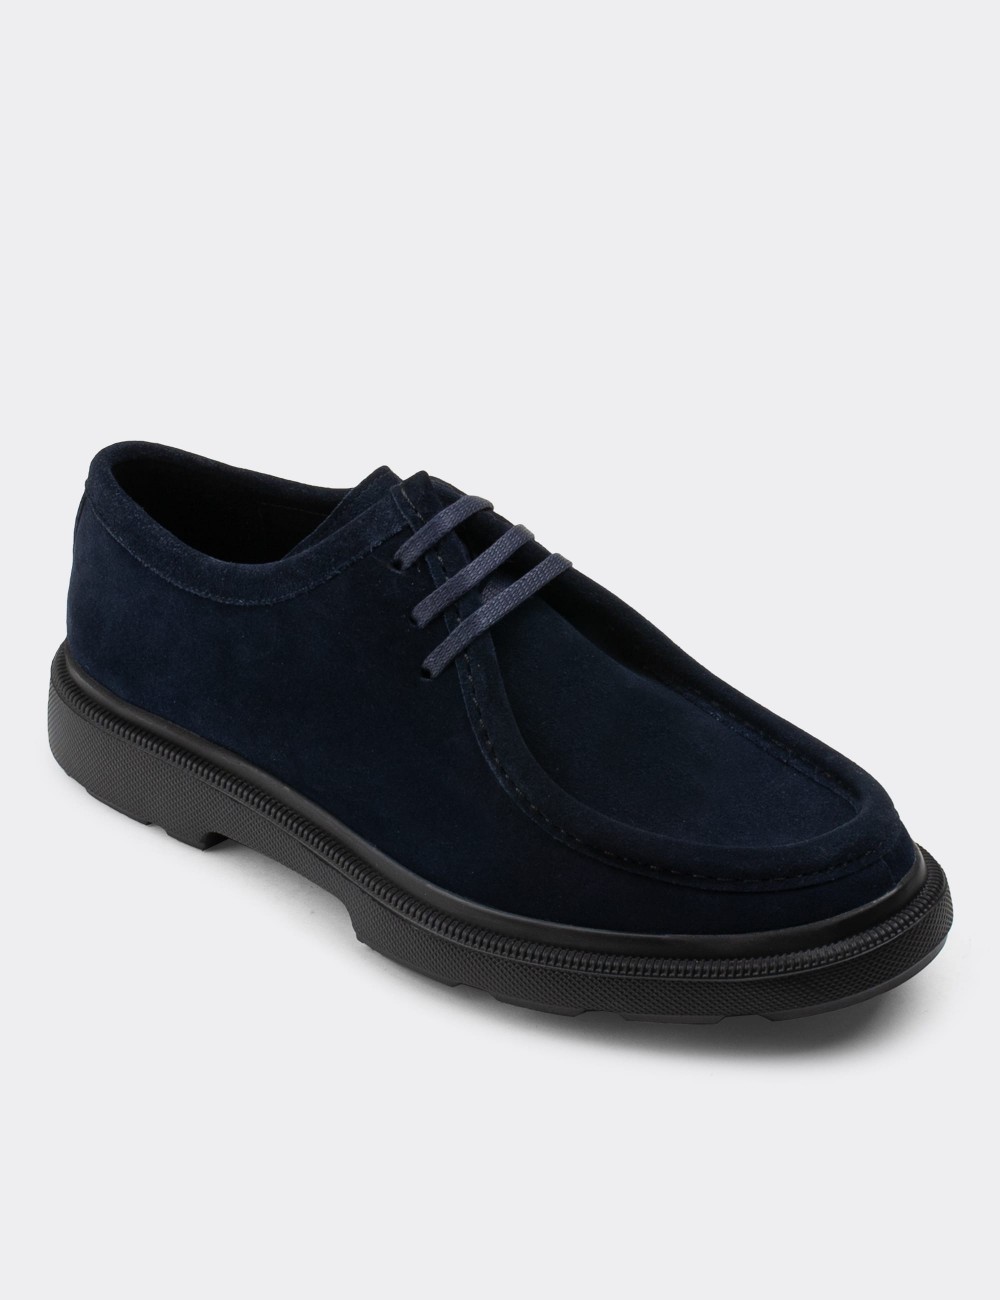 Navy Suede Leather Lace-up Shoes - 01851MLCVP01